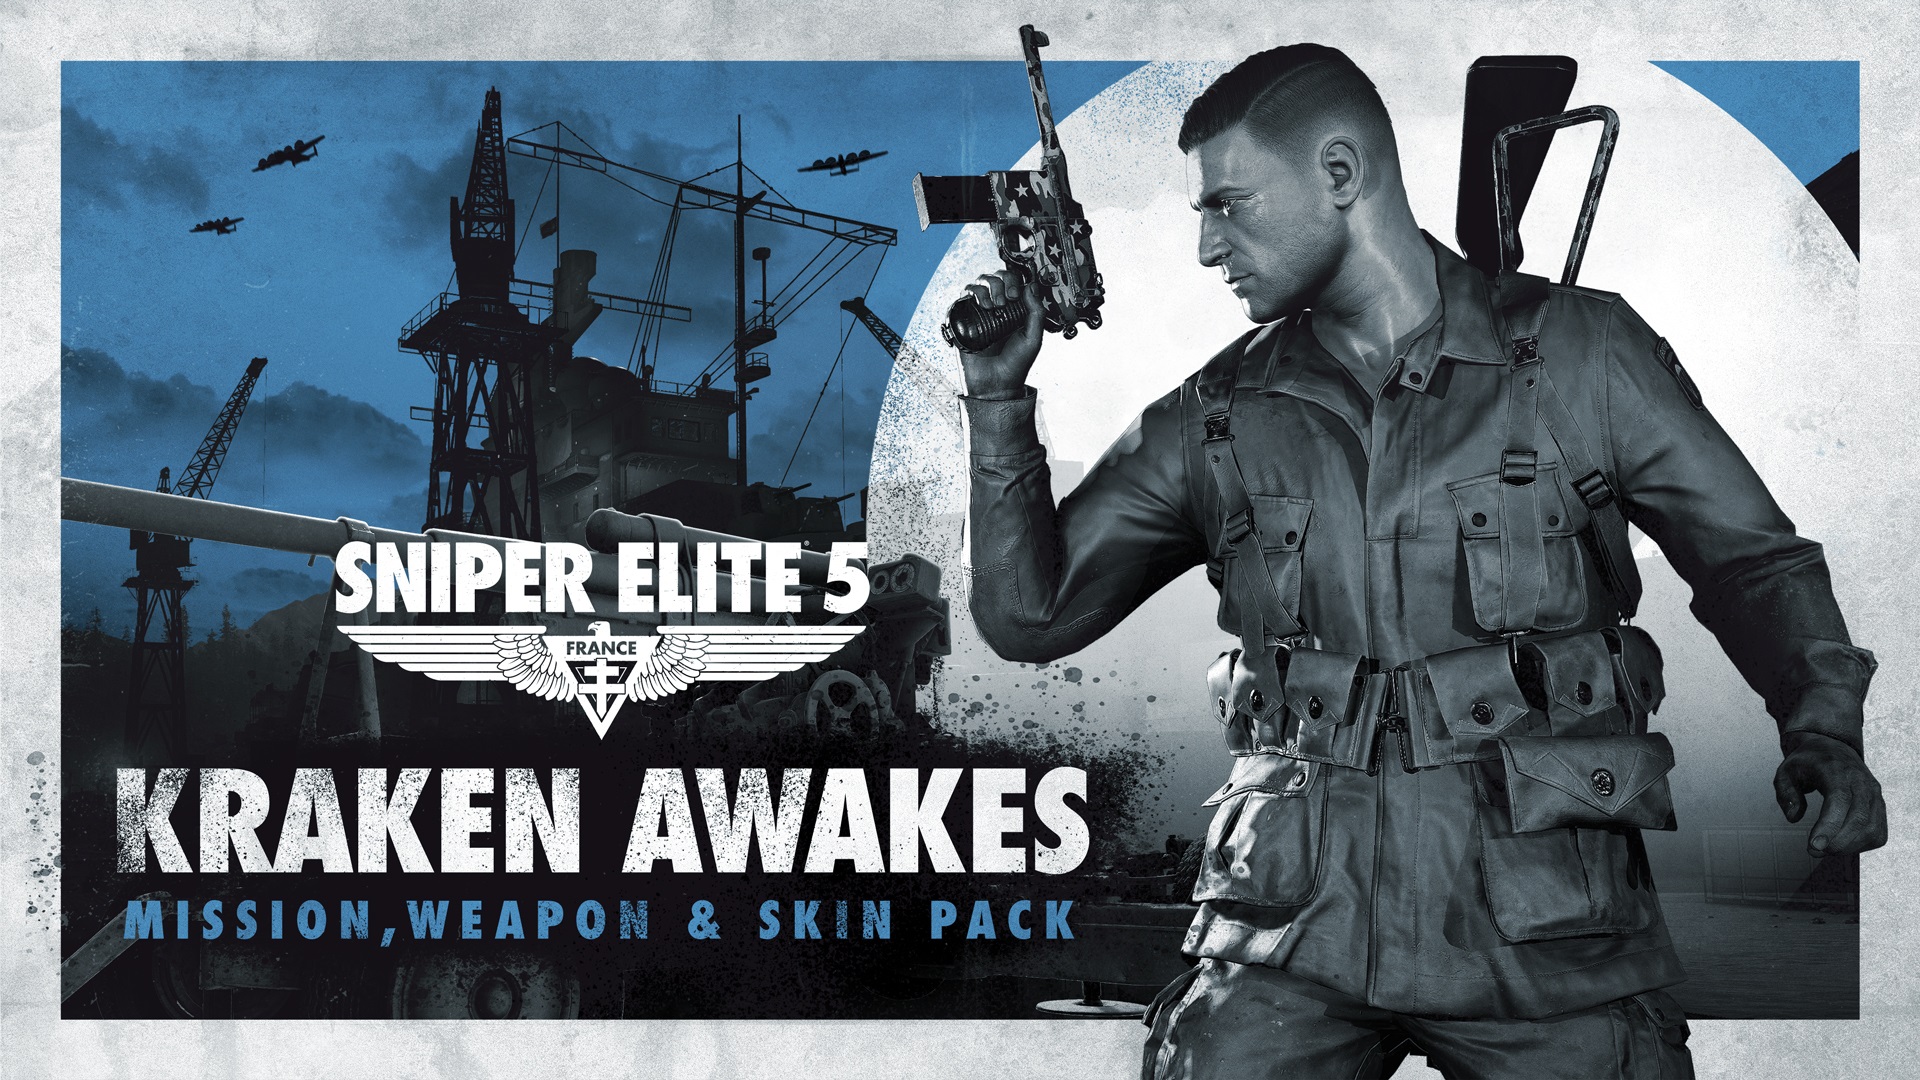 The Last Content material Pack For Sniper Elite 5, Kraken Awakes, Is Obtainable Right this moment